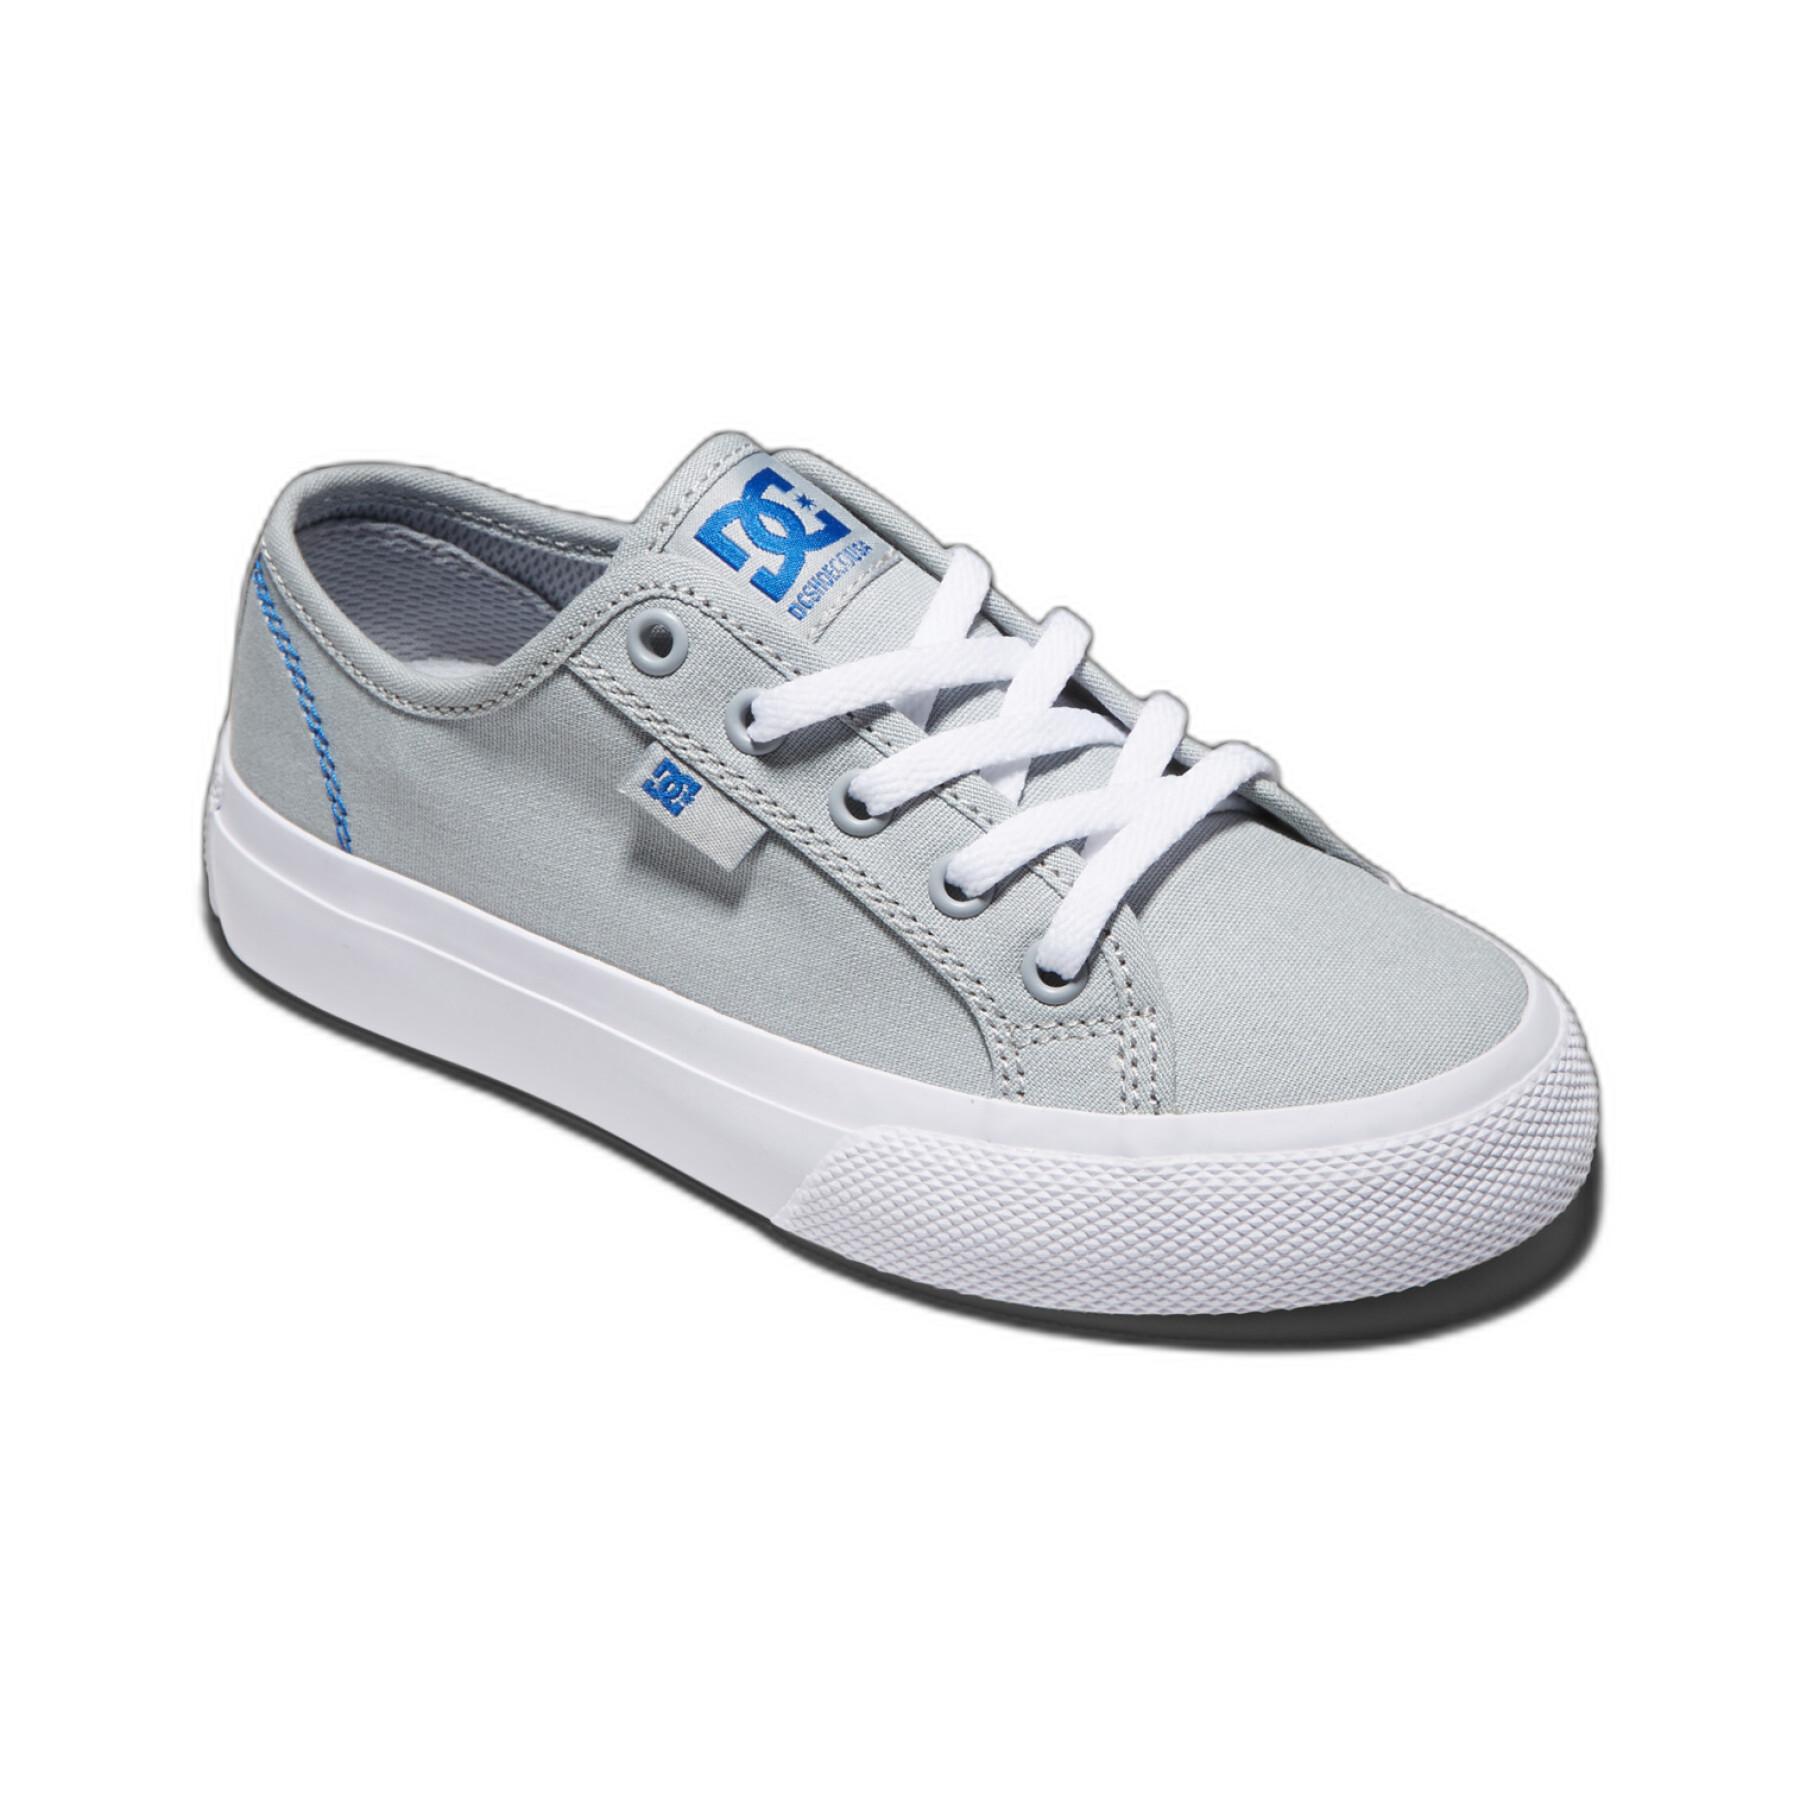 Children's sneakers DC Shoes Manual